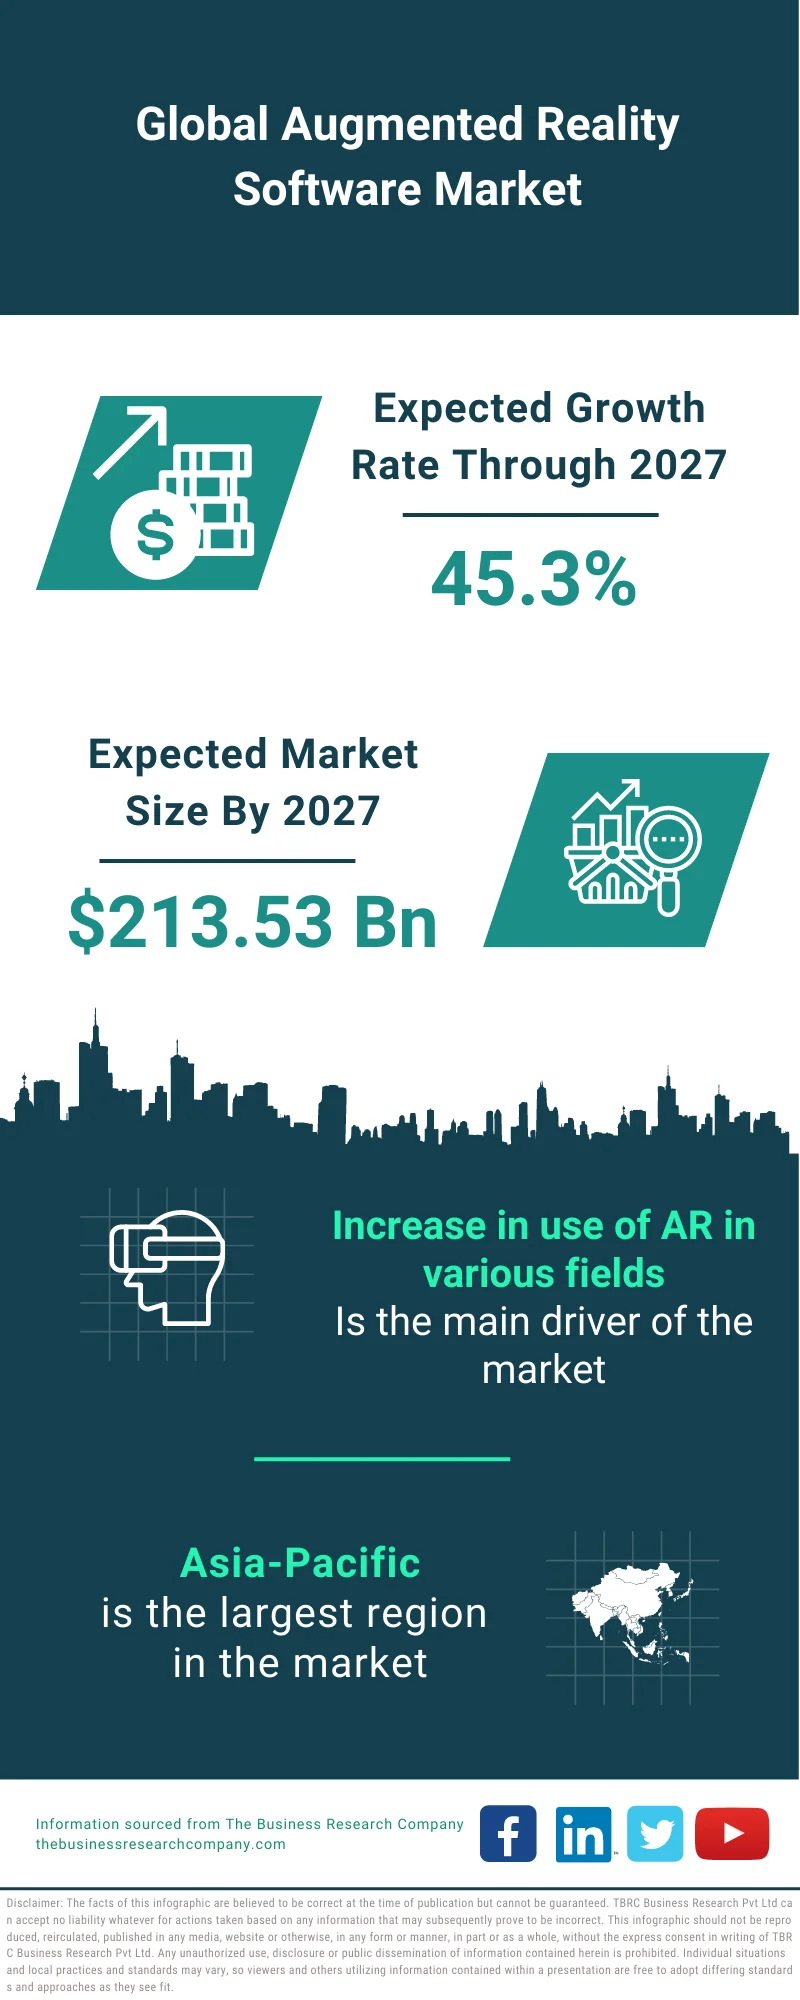 Augmented Reality Software Market